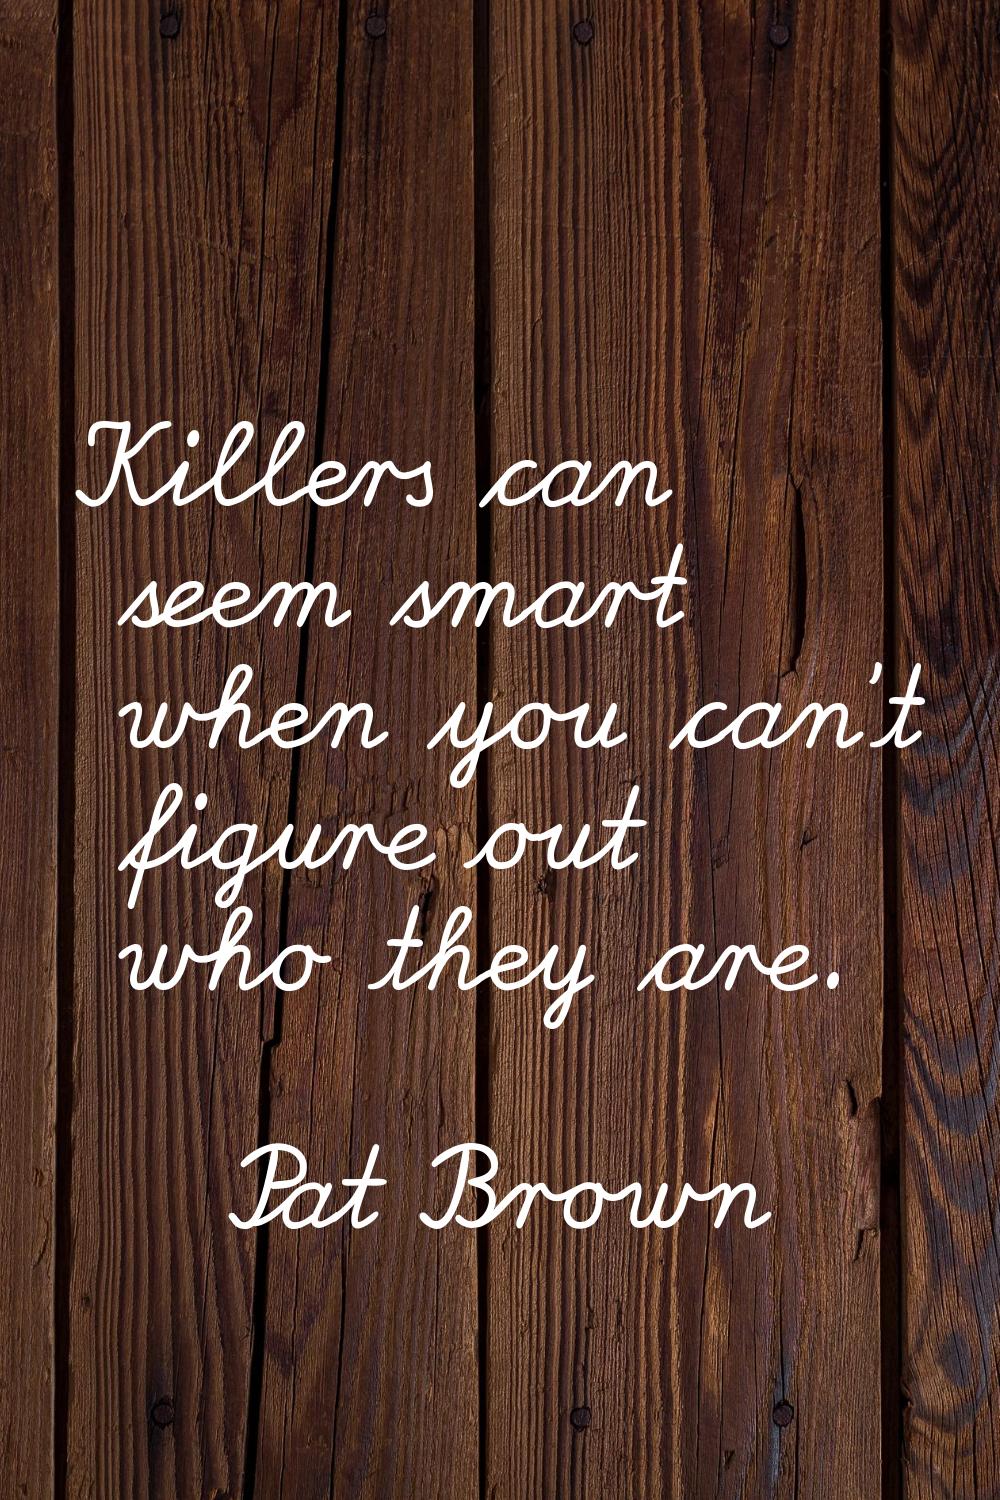 Killers can seem smart when you can't figure out who they are.